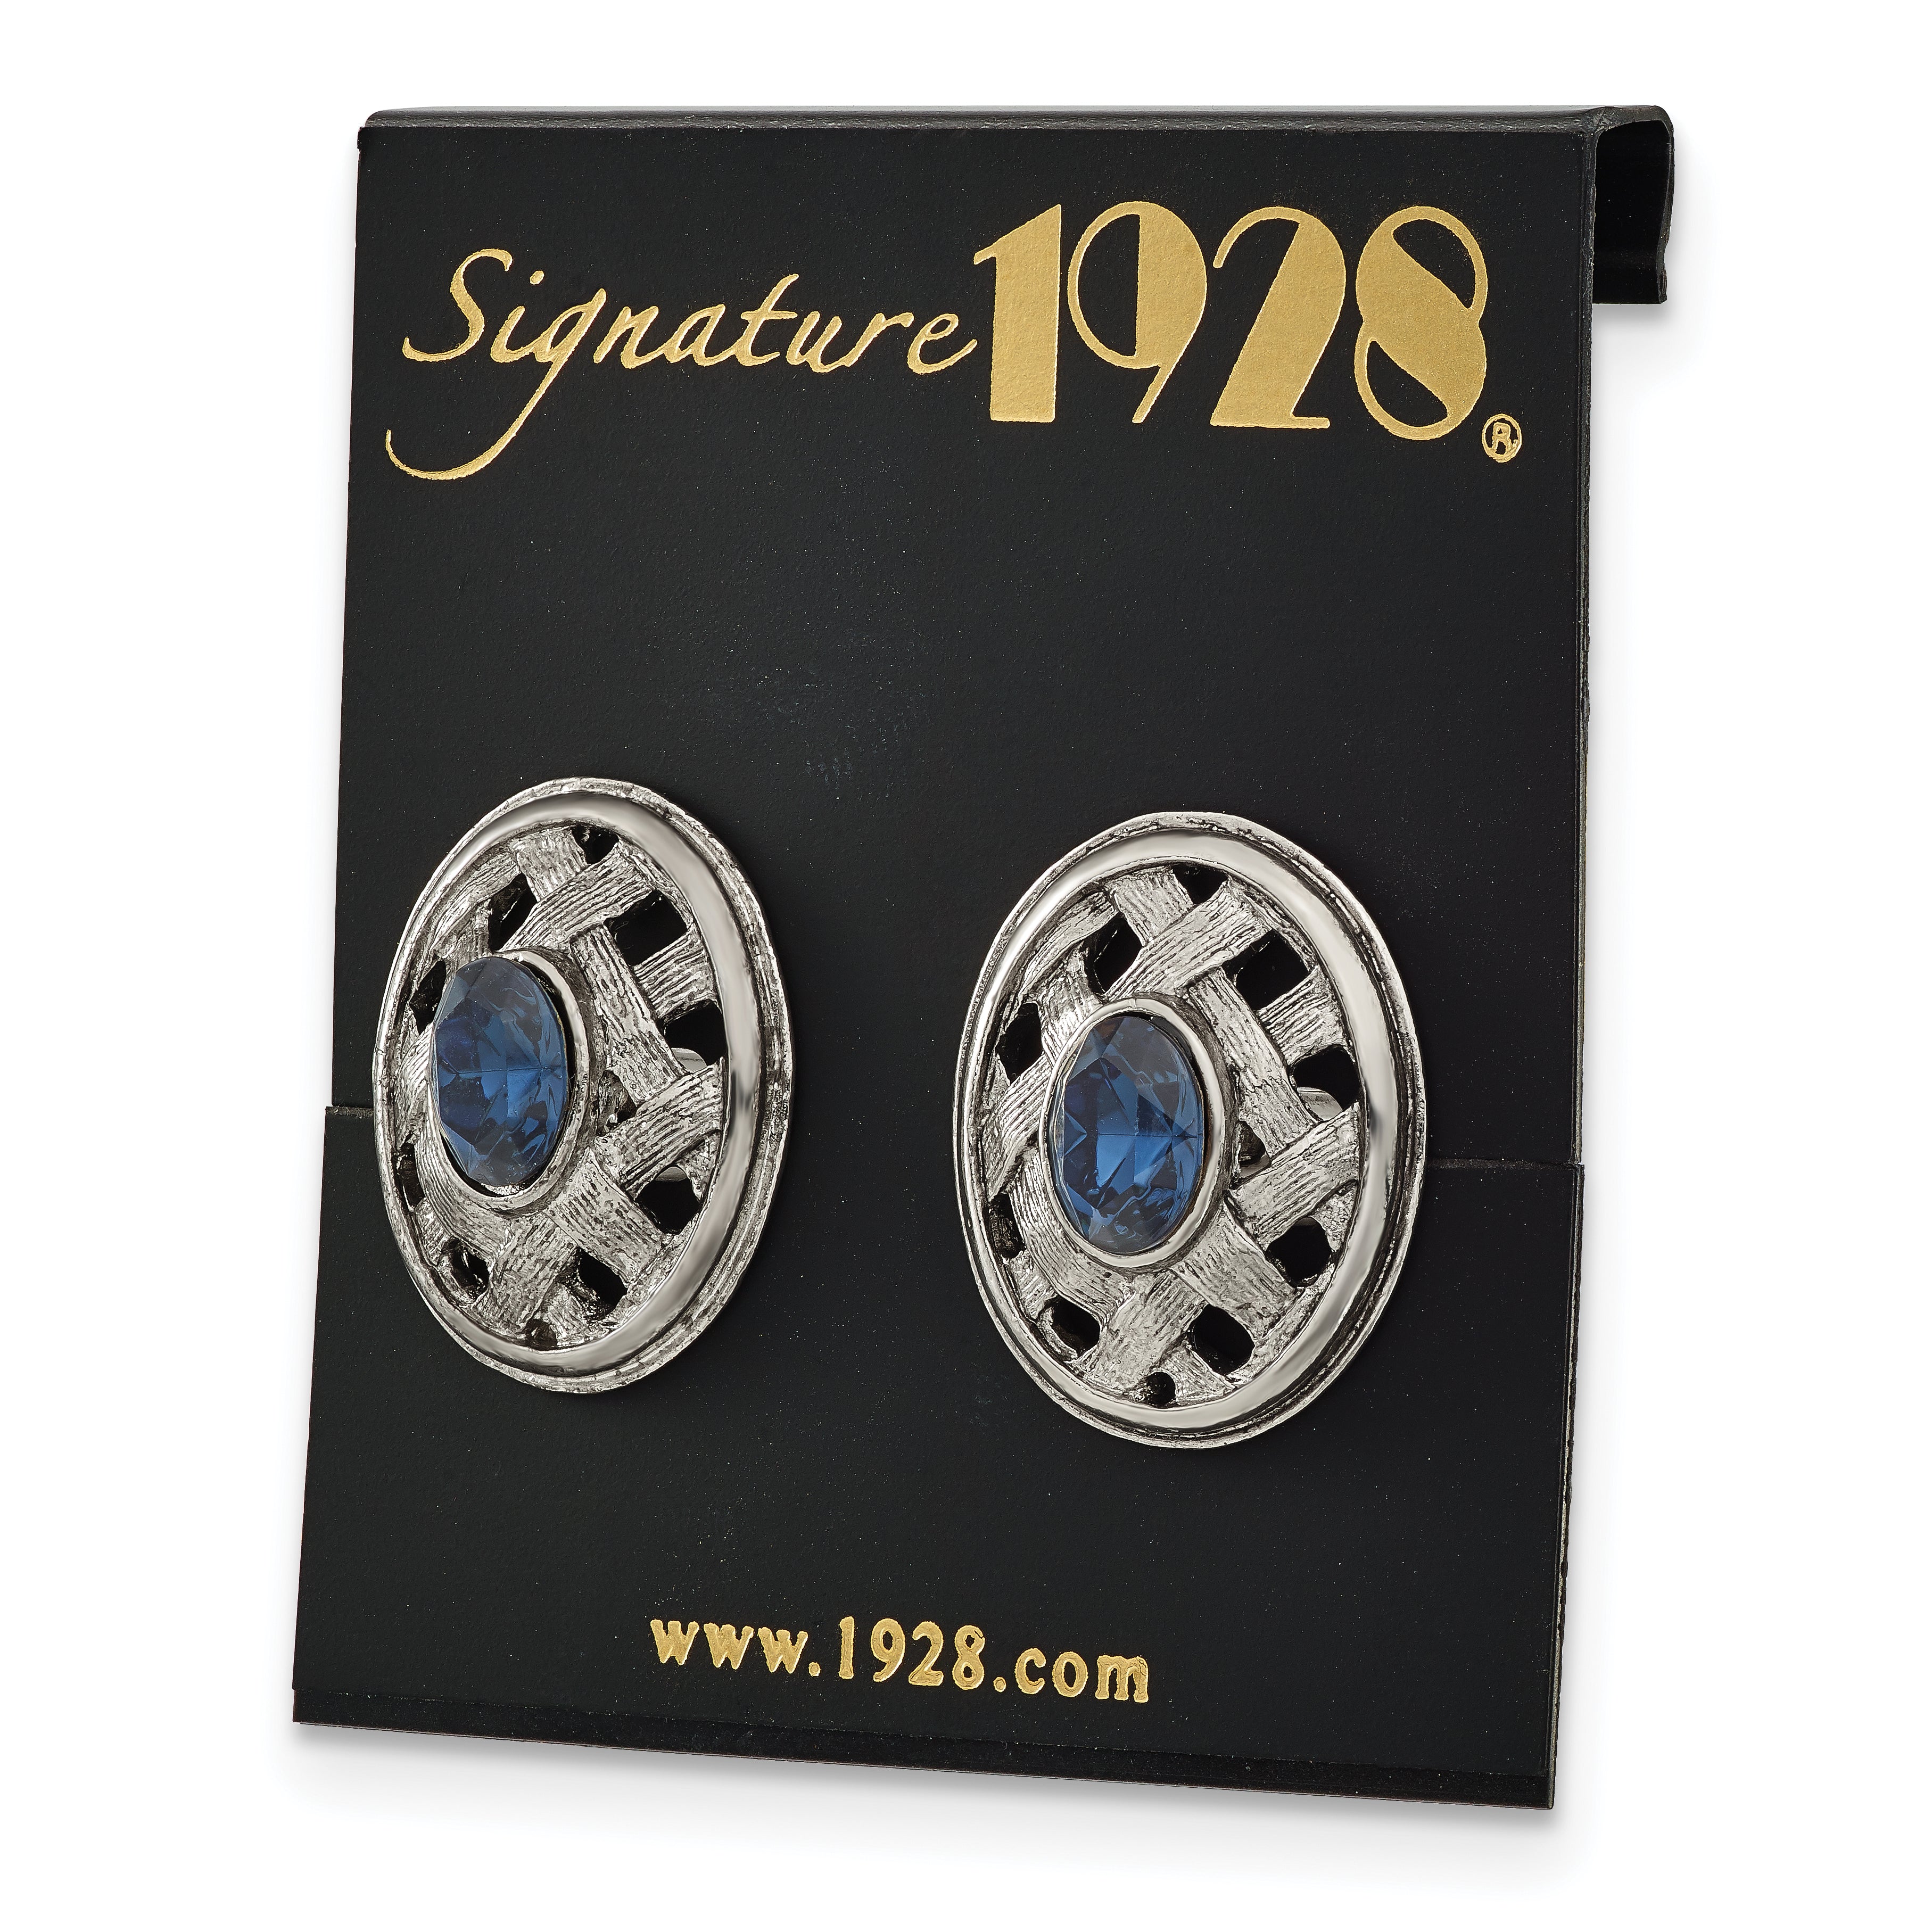 1928 Jewelry Silver-tone Textured Woven Frame and Faceted Blue Crystal Oval Cuff Links